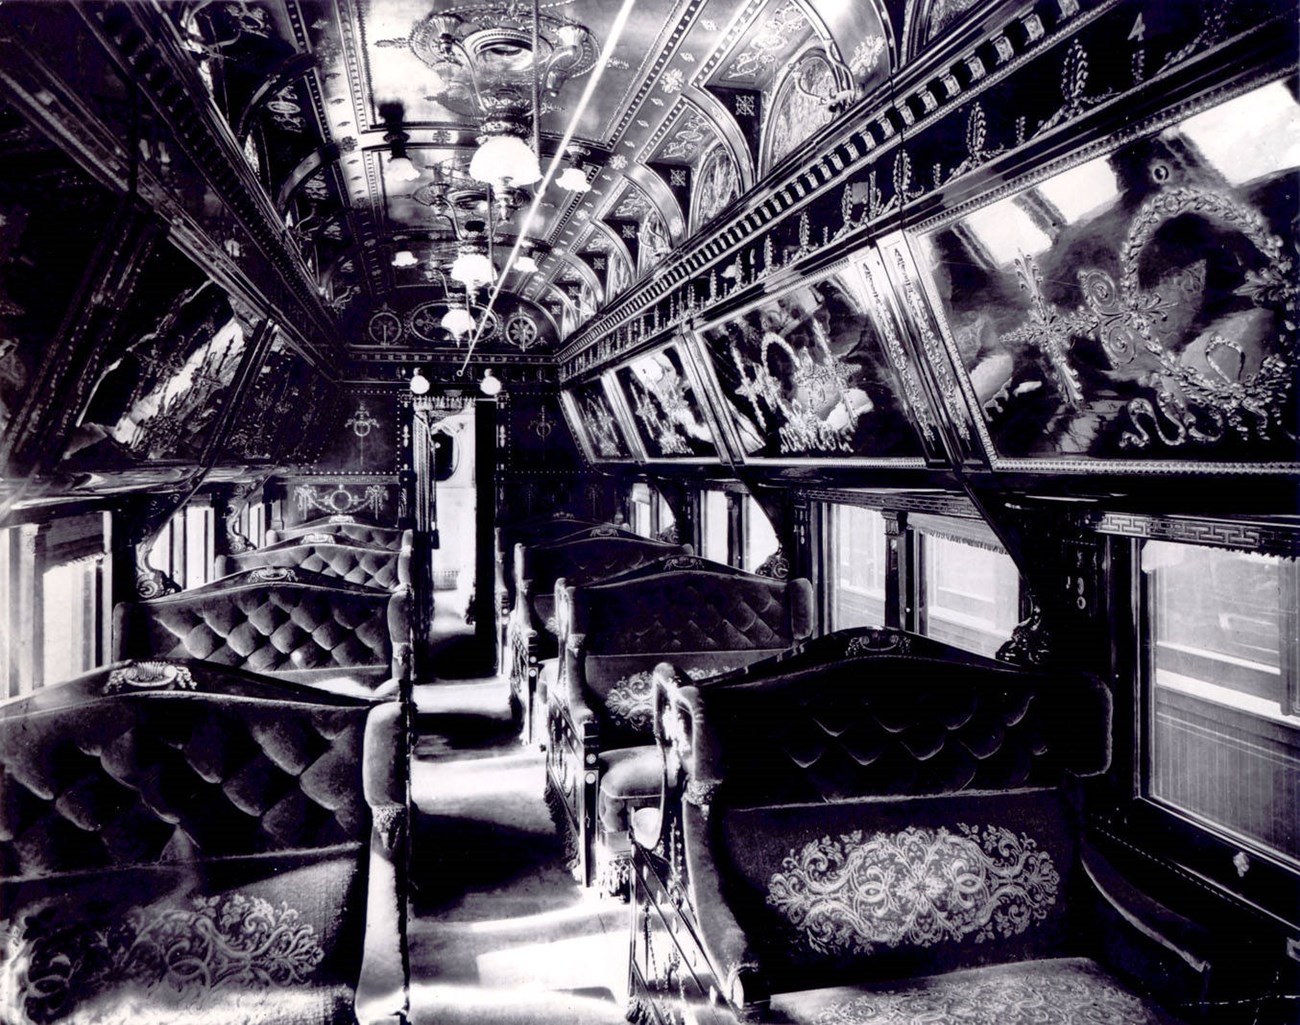 Interior of a train car with plush seating and carpeting and decorative luggage overheads, black and white photo.